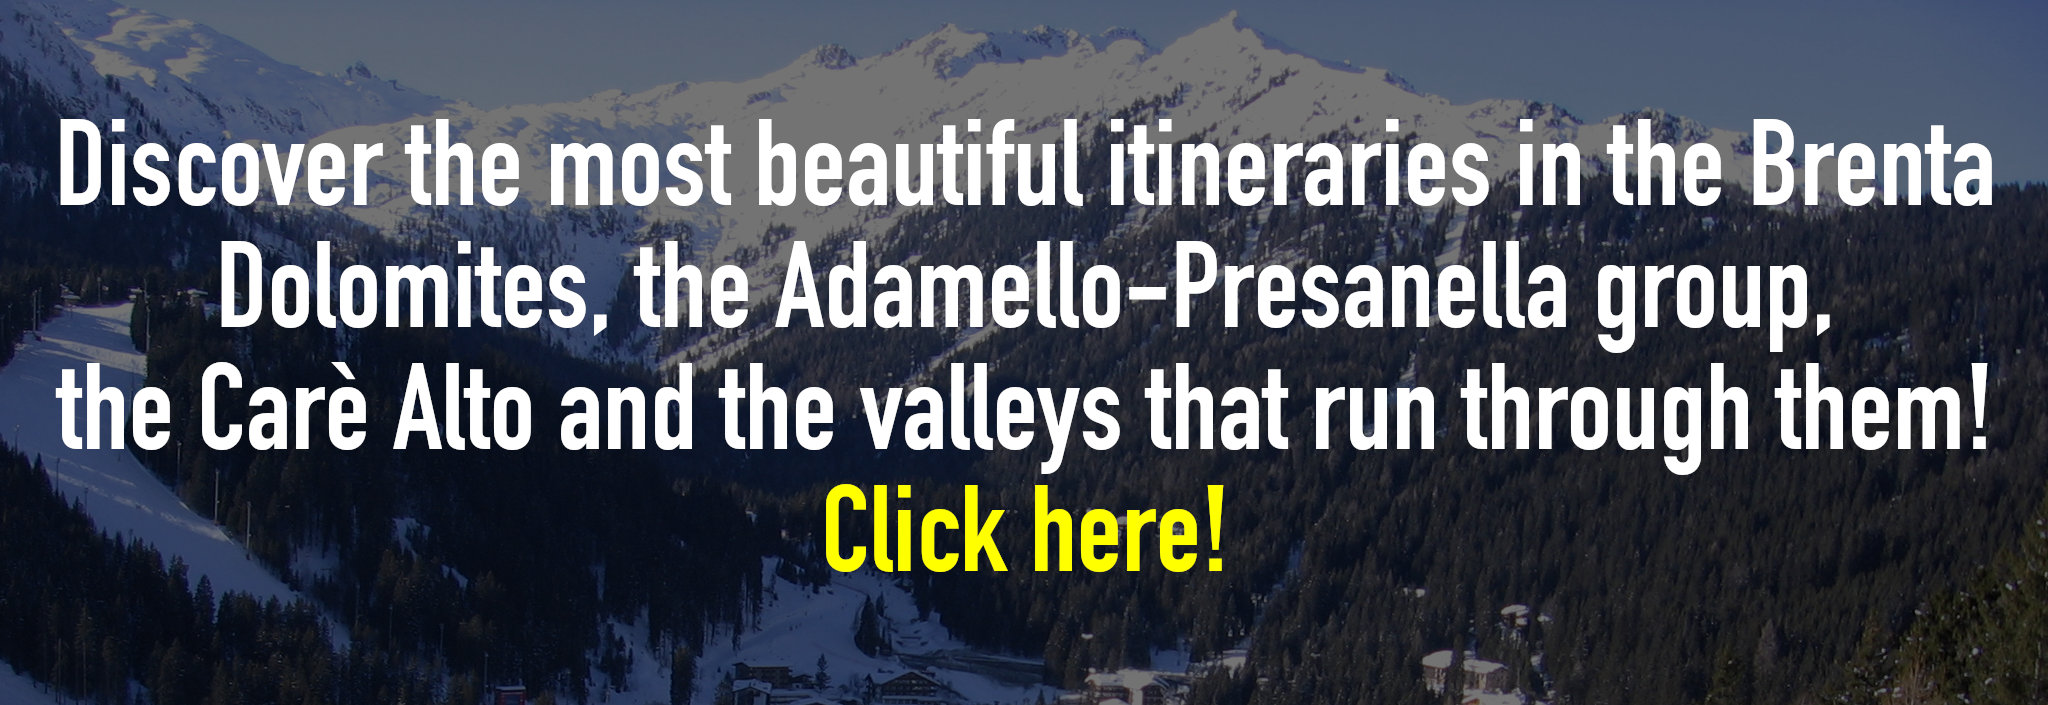 Discover the most beautiful itineraries in the Brenta Dolomites, the Adamello-Presanella group, the Carè Alto and the valleys that run through them!